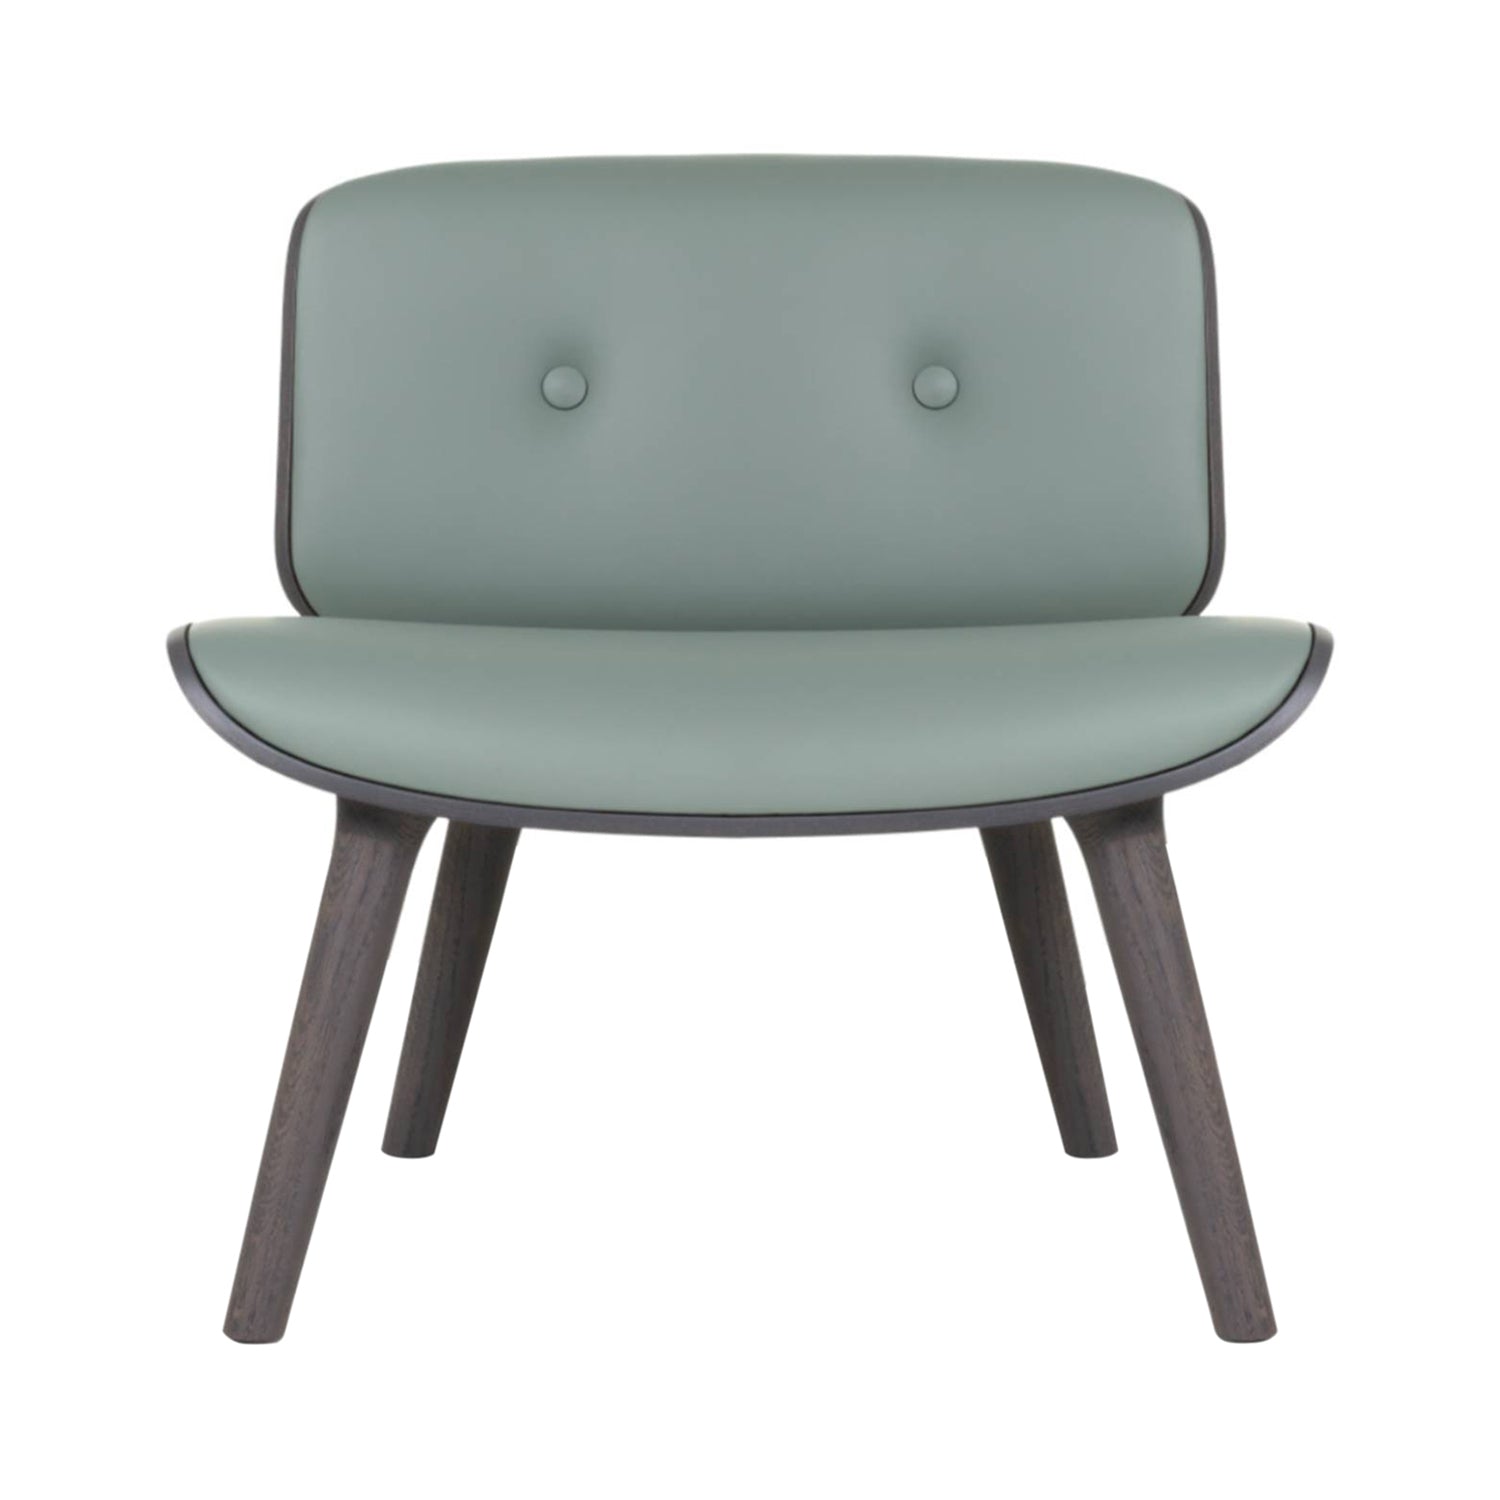 Nut Lounge Chair: Grey + Spectrum Agave 30098